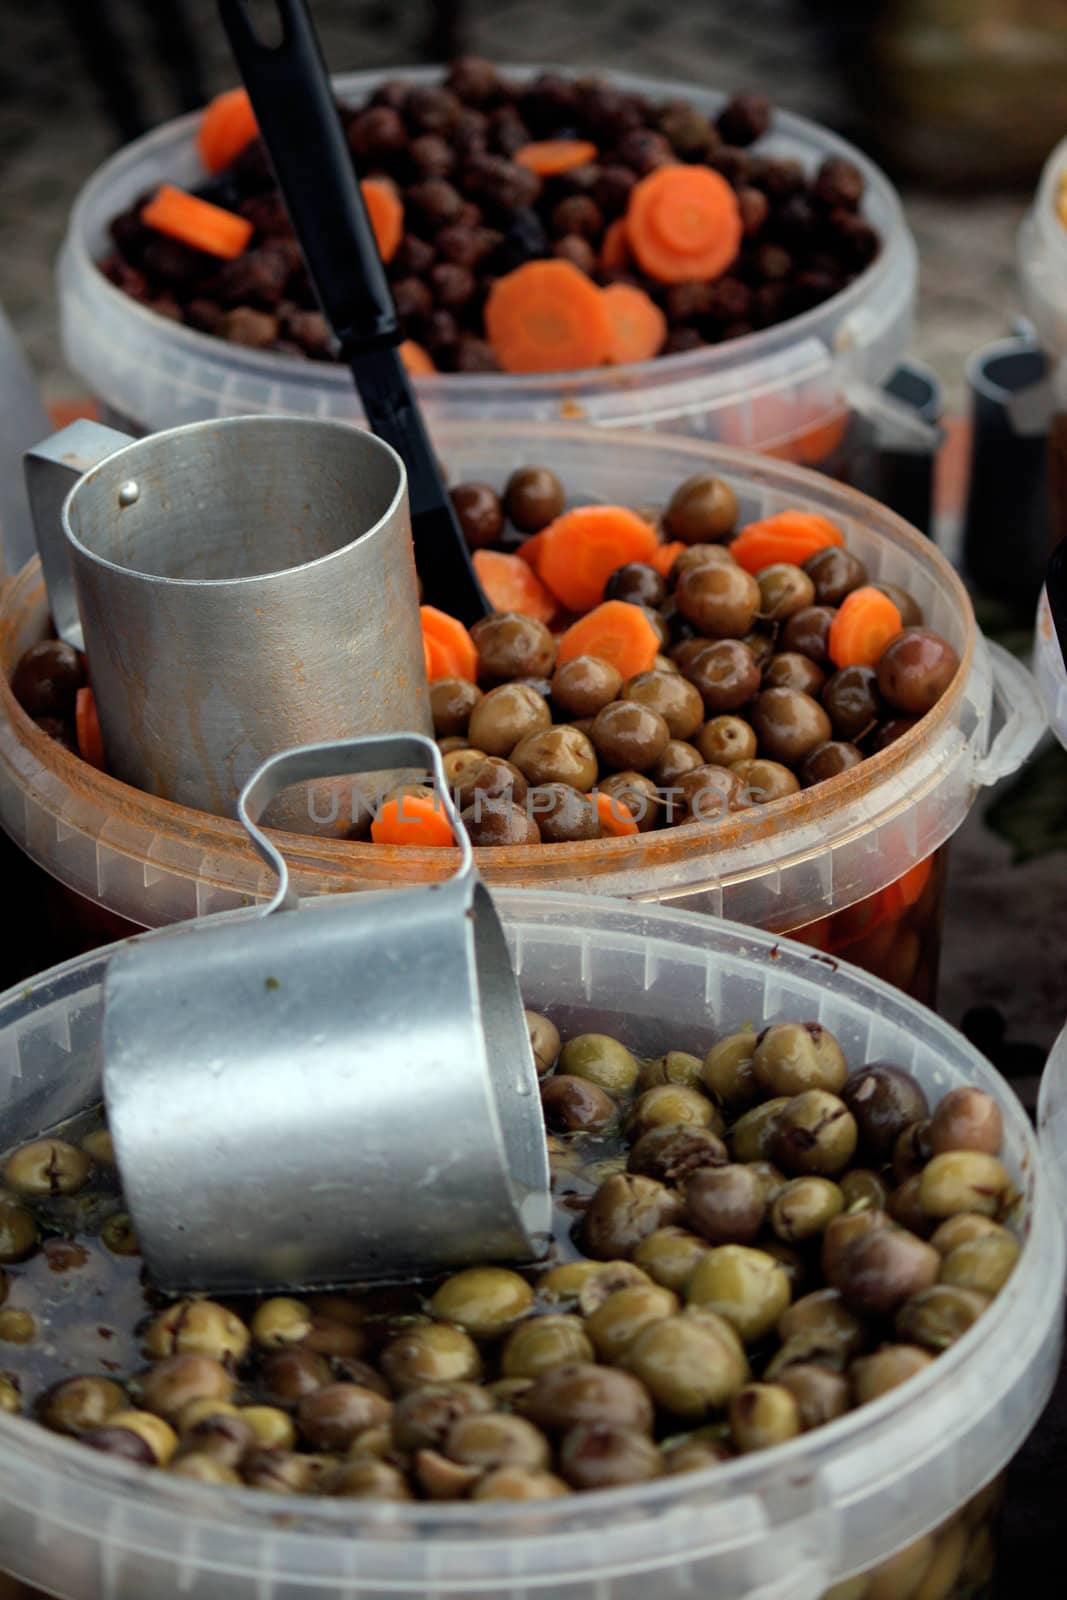 View of some containers on a street marked selling olives.